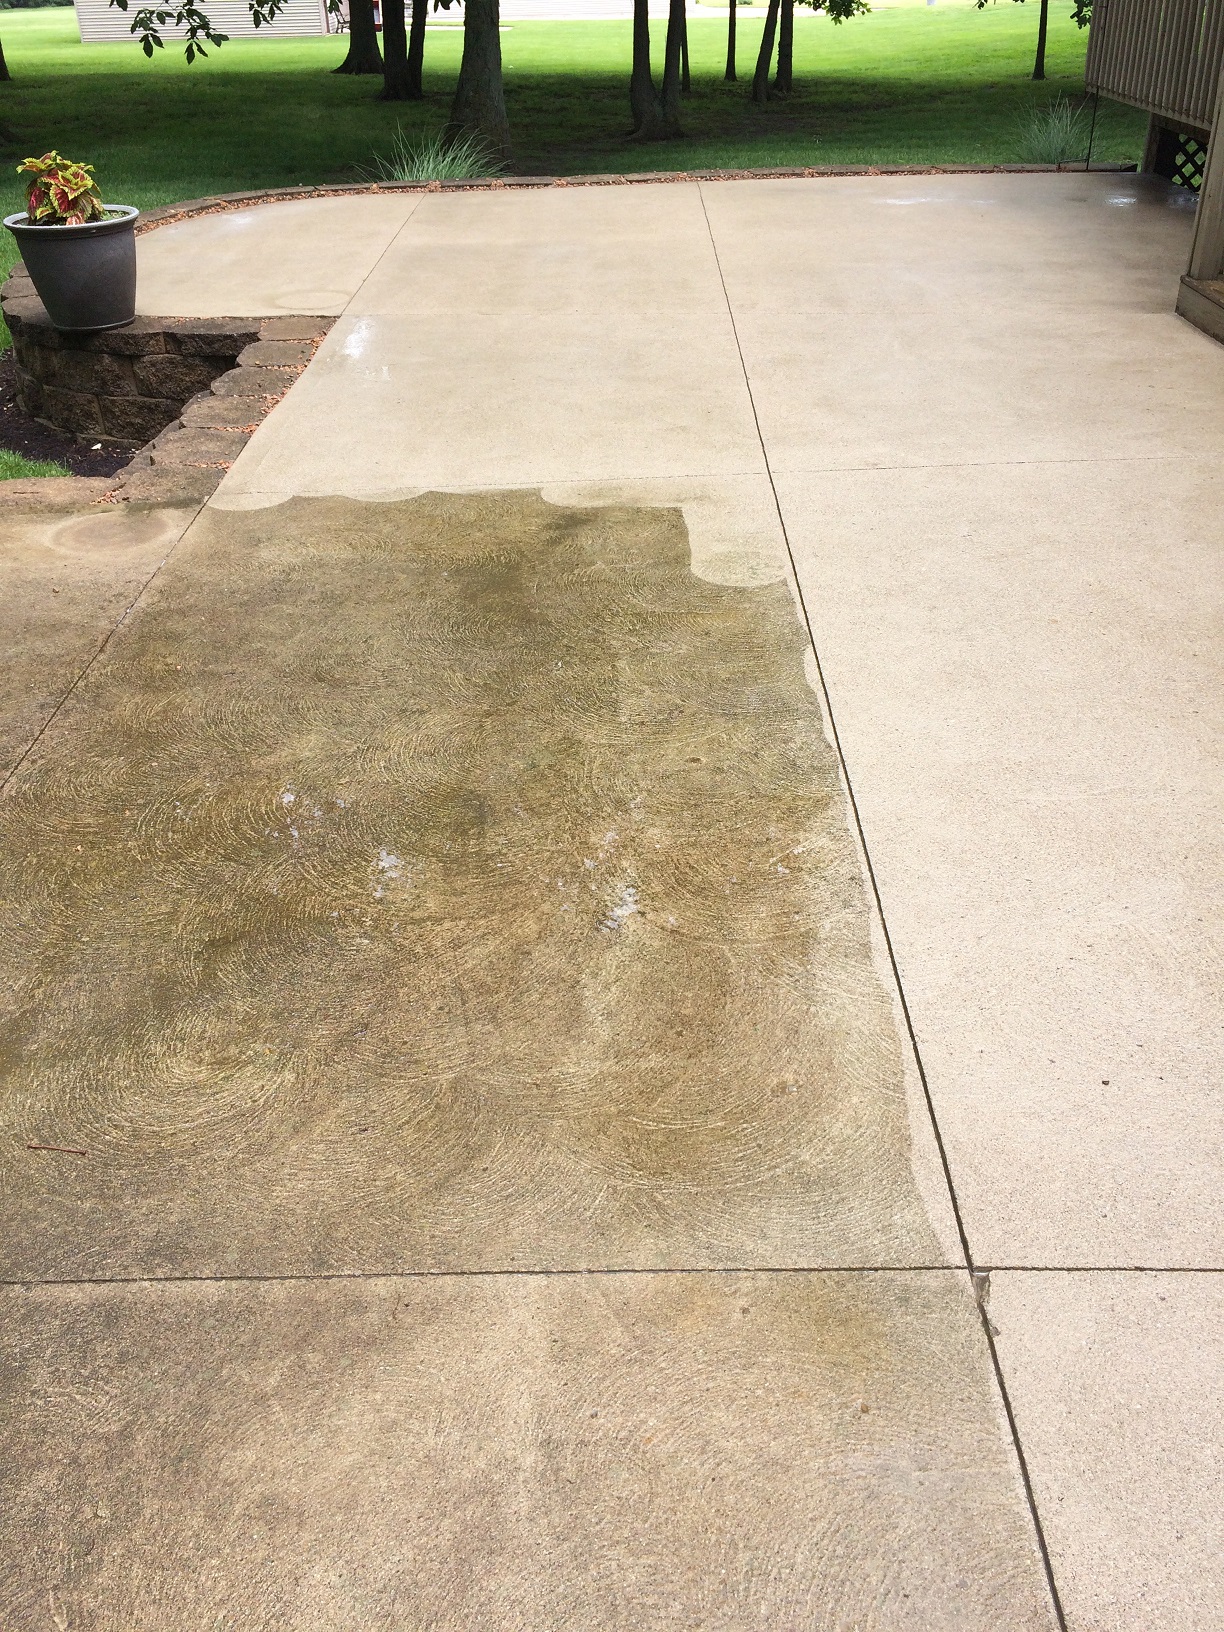 This was a shot of the patio during the cleaning